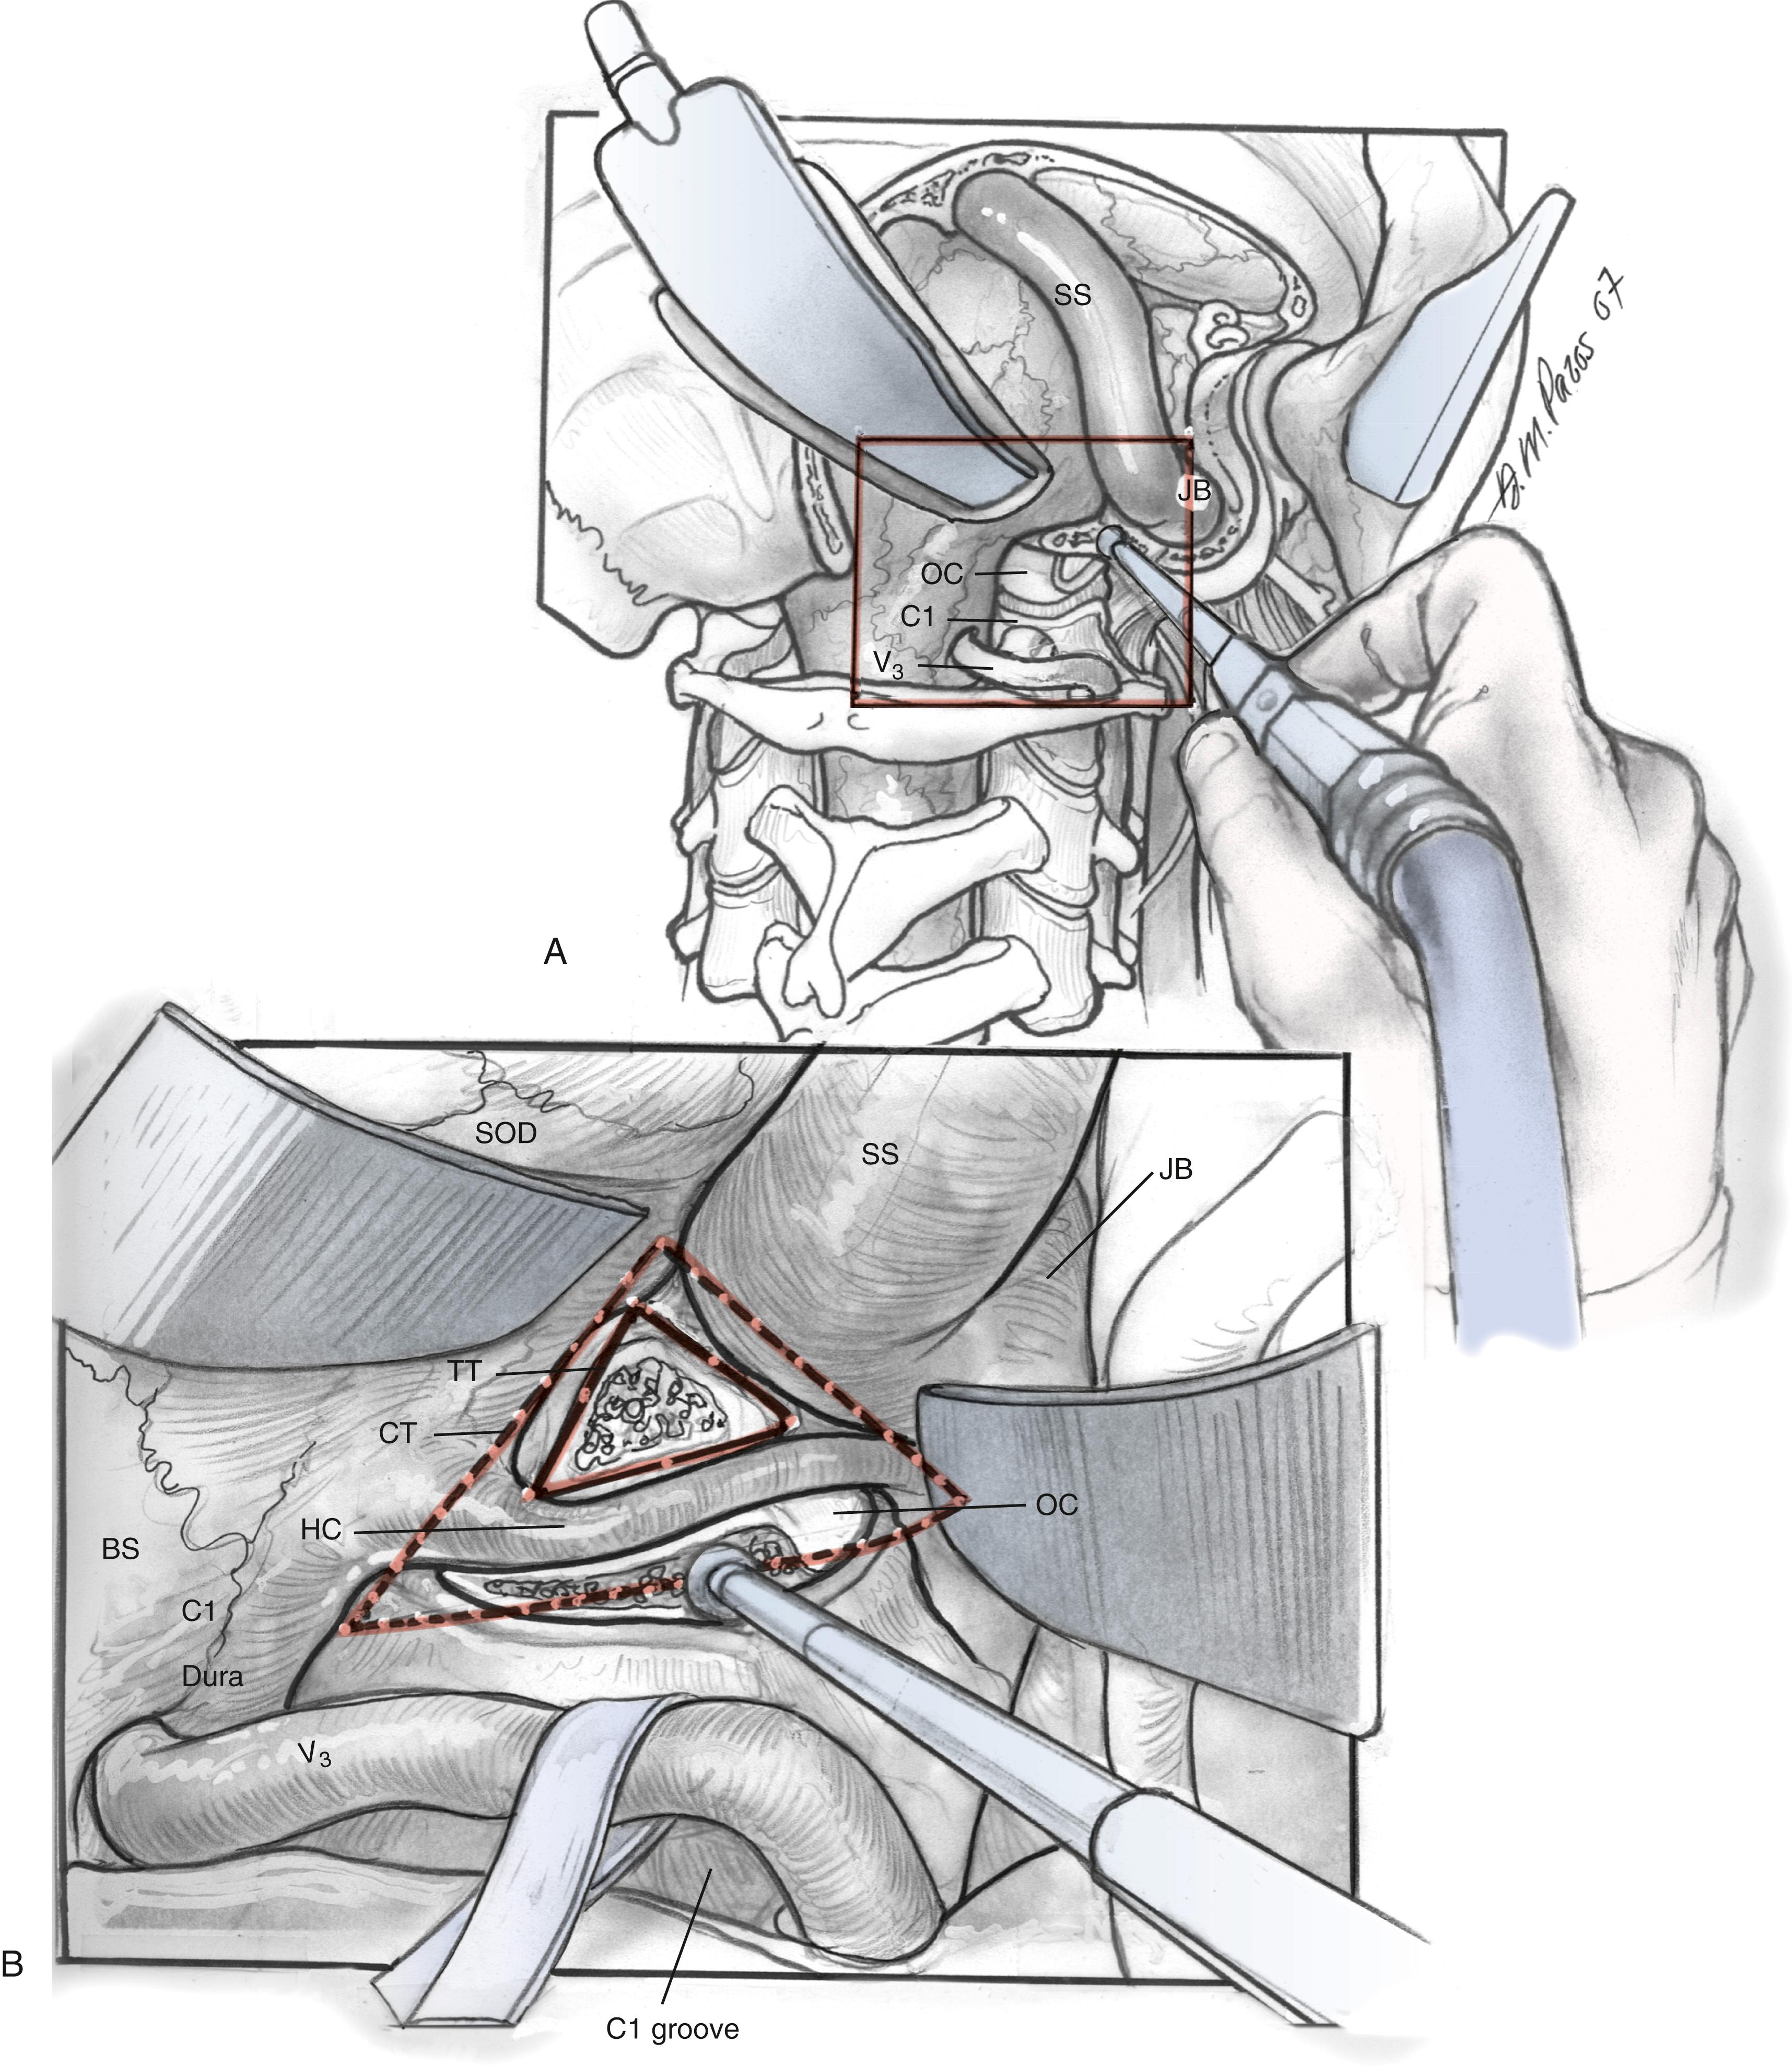 Fig. 54.6, (A and B) Dissection of occipital condyle.(C–E) Further dissection toward the foramen magnum and clivus, with exposure of the ventral medullary area. A to B, jugular tubercle JT length = 1.2–3.0 (1.65) cm; C to D, JT height = 0.7–1.7 (1.05) cm; E to F, JT thickness = 0.2–1.0 (0.61) cm. BA, Basilar artery; BS, brainstem; CC, common carotid artery; Cl, condyle atlas; CT, condylar triangle; HC, hypoglossal canal and CN XII; JB, jugular bulb; JF, jugular foramen; JT, jugular tubercle; JV, jugular vein; OC, occipital condyle; MFD, middle fossa dura; PFD, posterior fossa dura; SOD, suboccipital dura; SS, sigmoid sinus; TT, tubercular triangle; VA, vertebral artery.